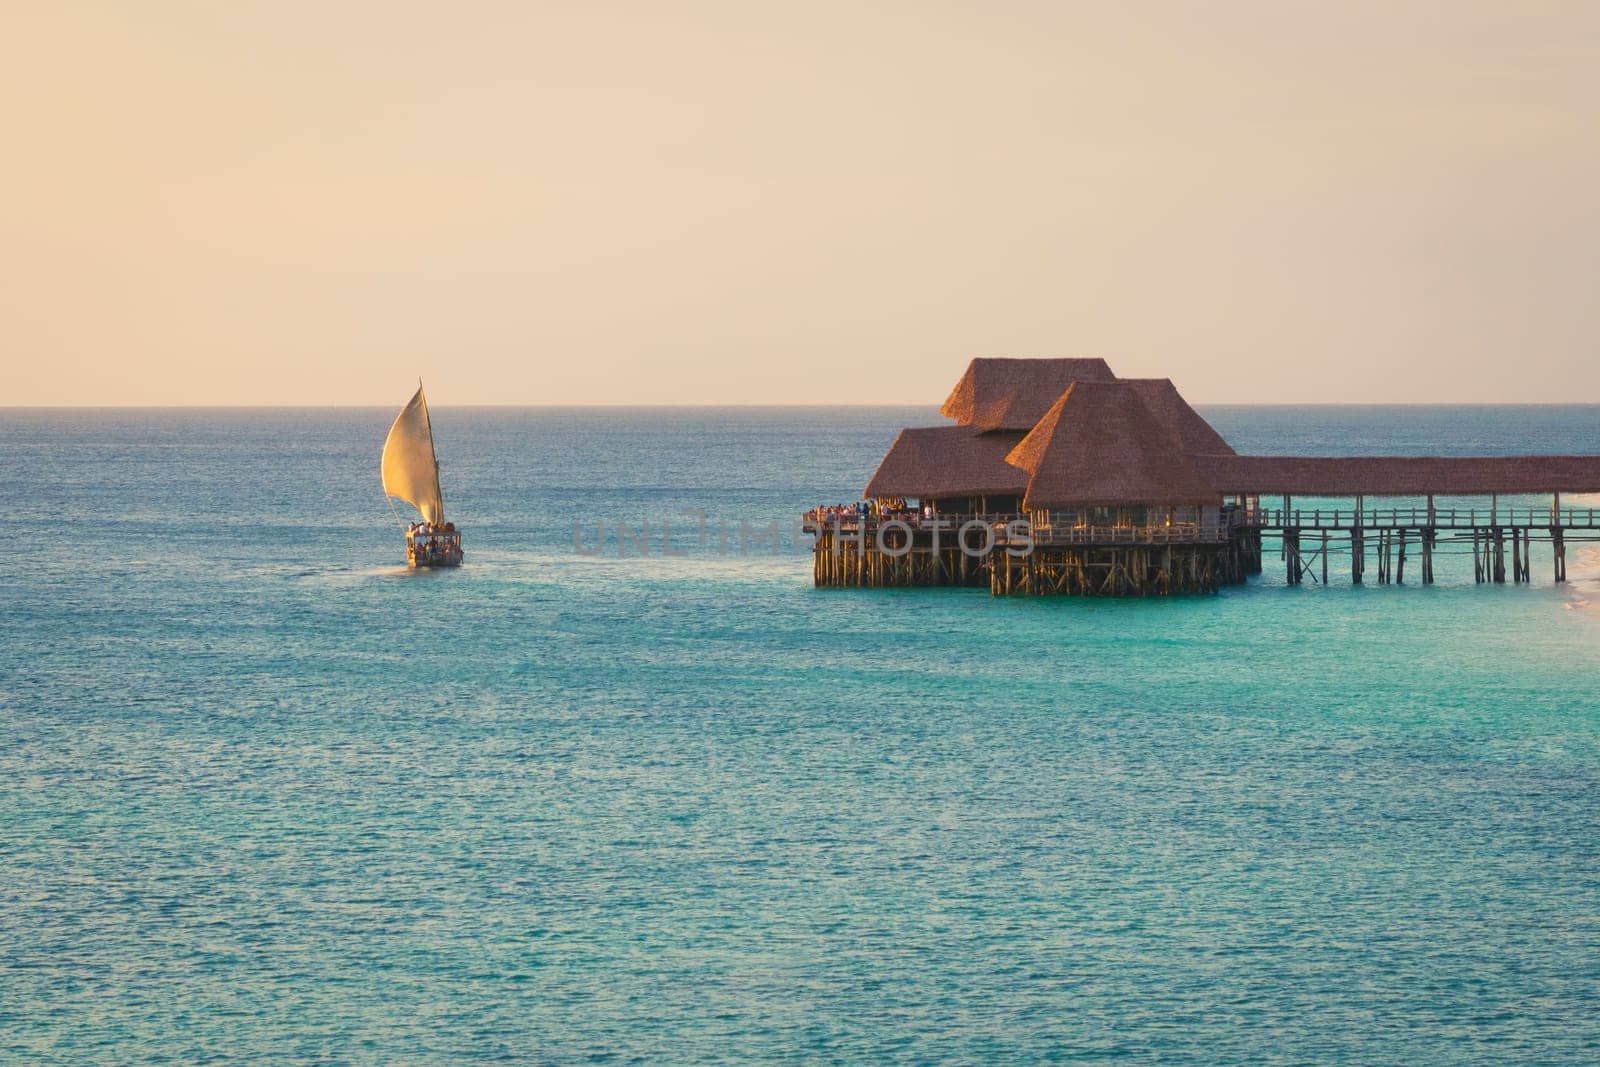 Dhow boat sails in the ocean near beautiful thatch stilt house restaurant at sunset, summer concept and copy-space, Zanzibar,Tanzania